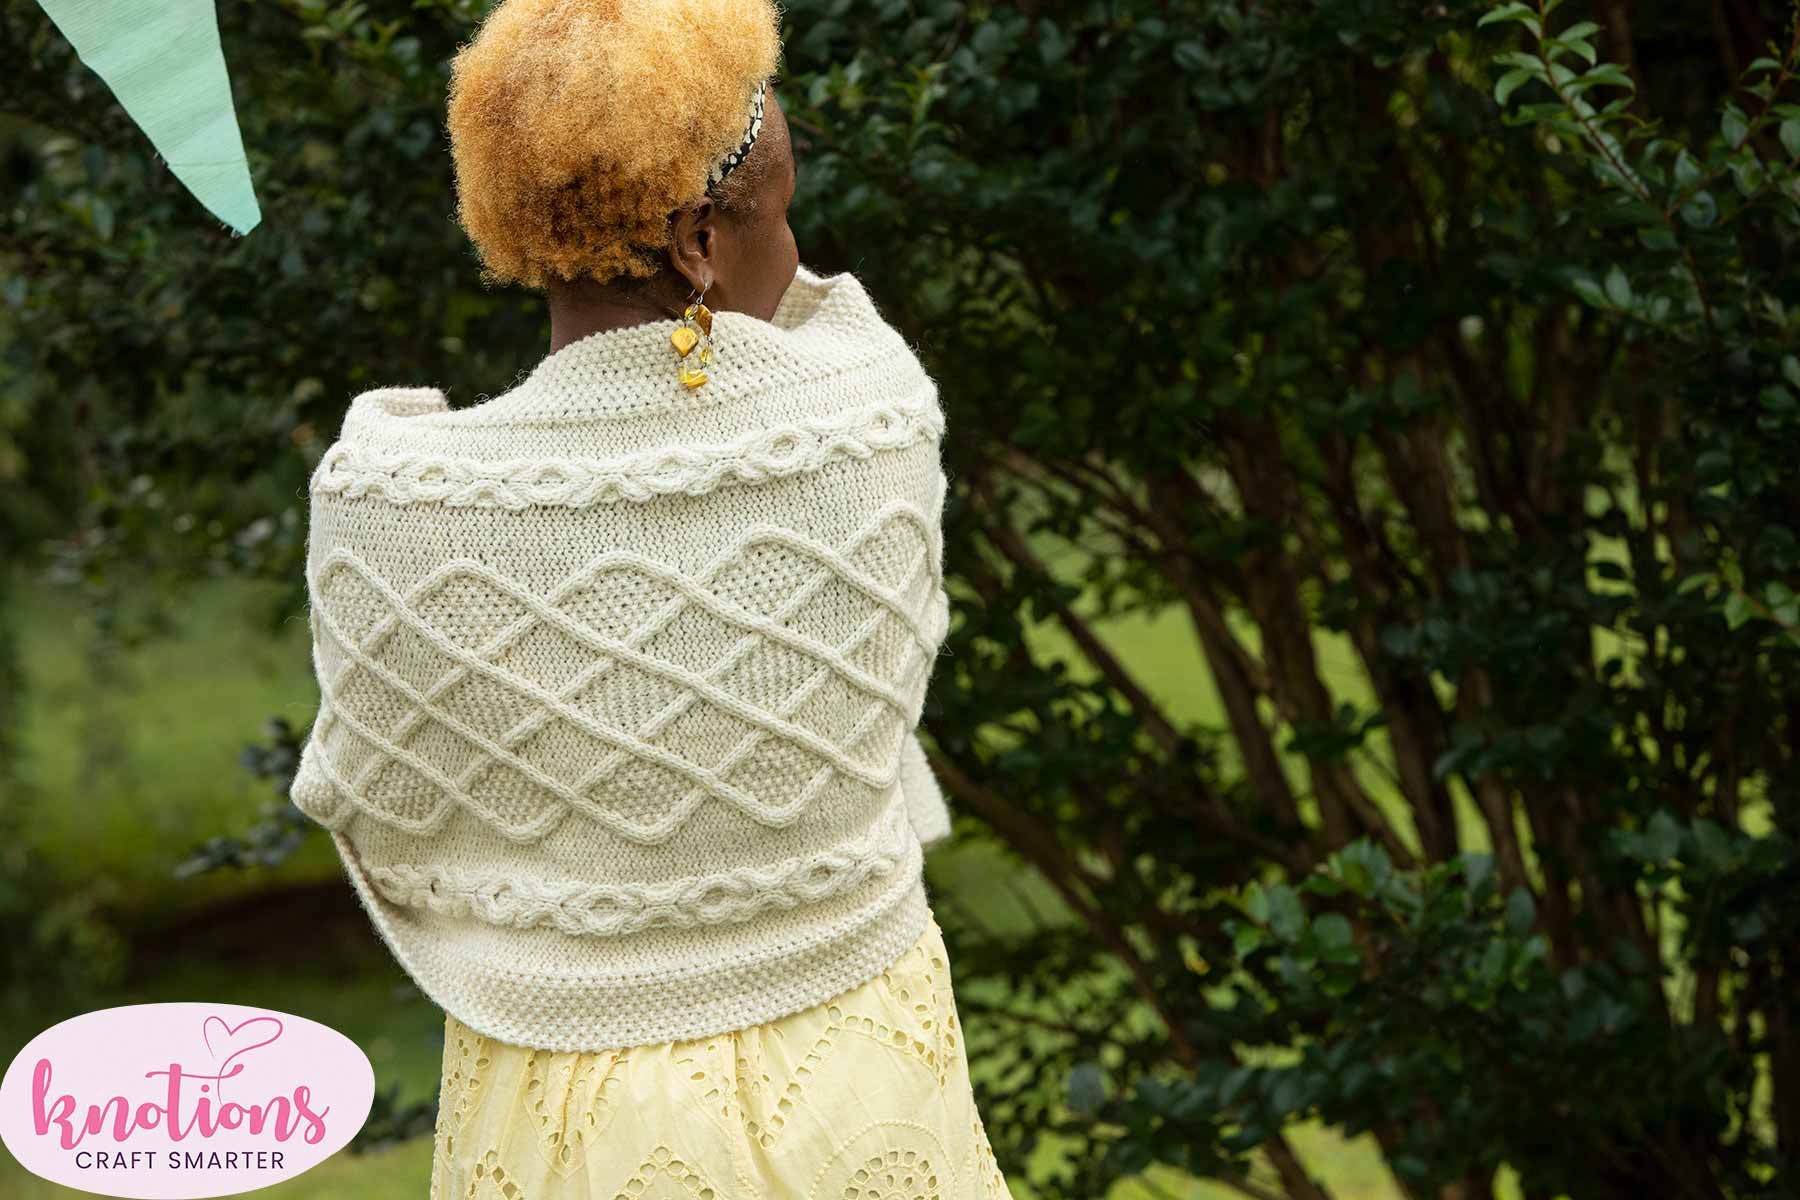 A back view of the Inishere Wrap, a white cabled knitted shawl, worn with a summer dress.